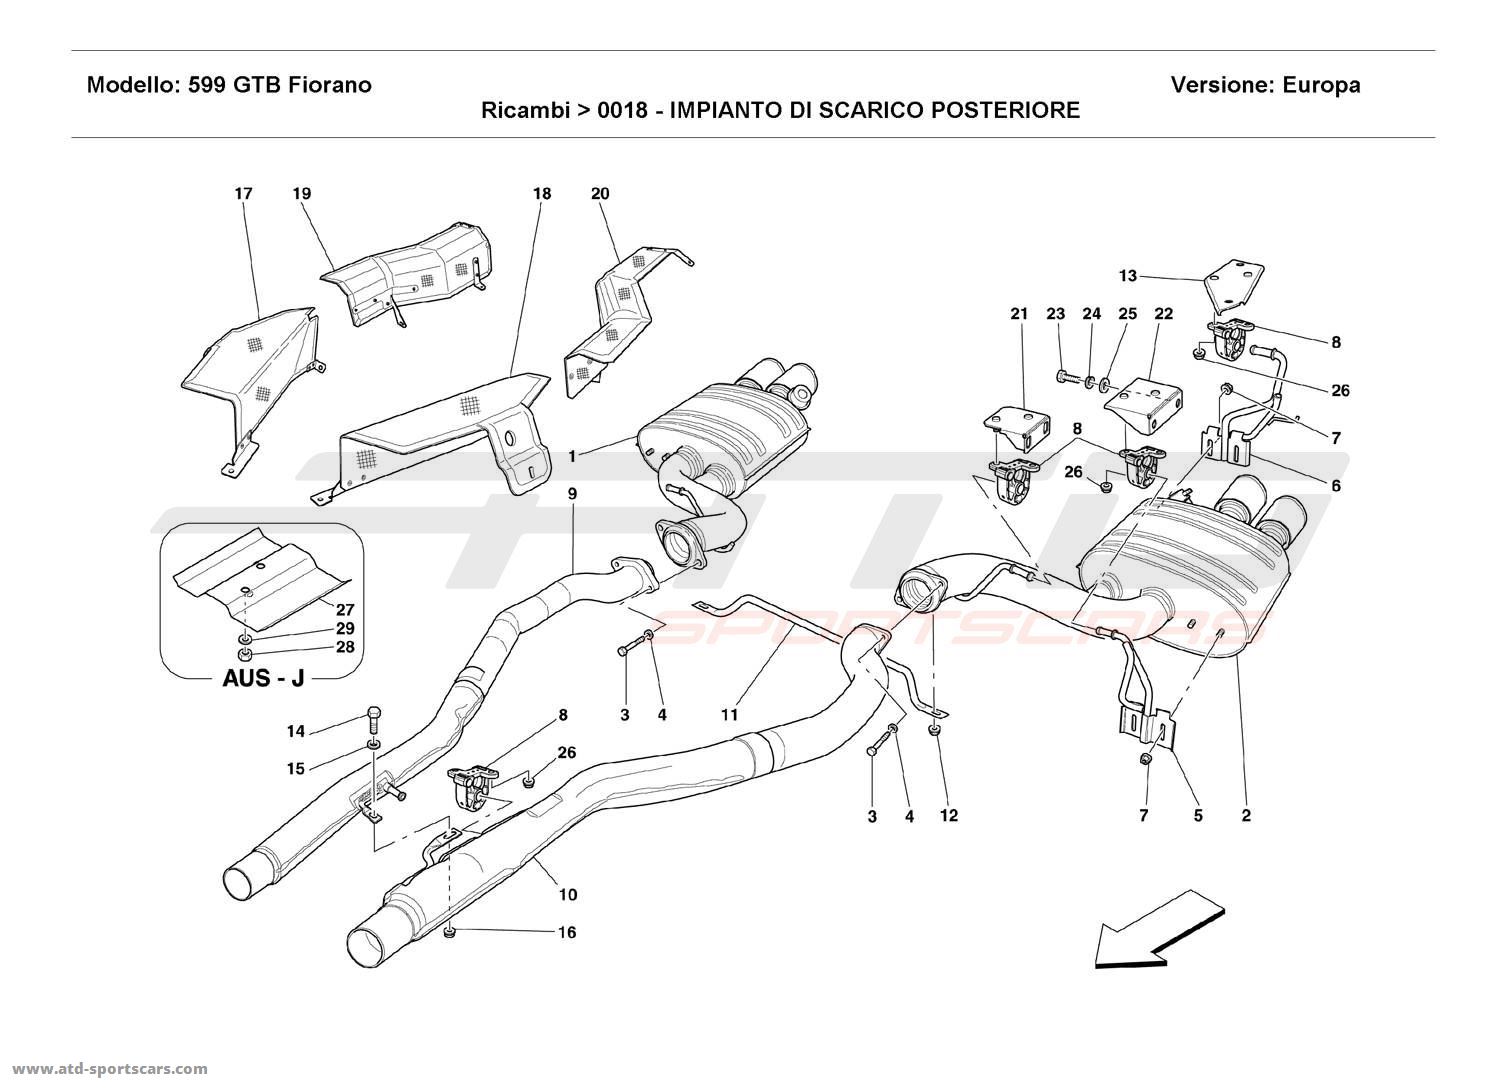 REAR EXHAUST SYSTEM